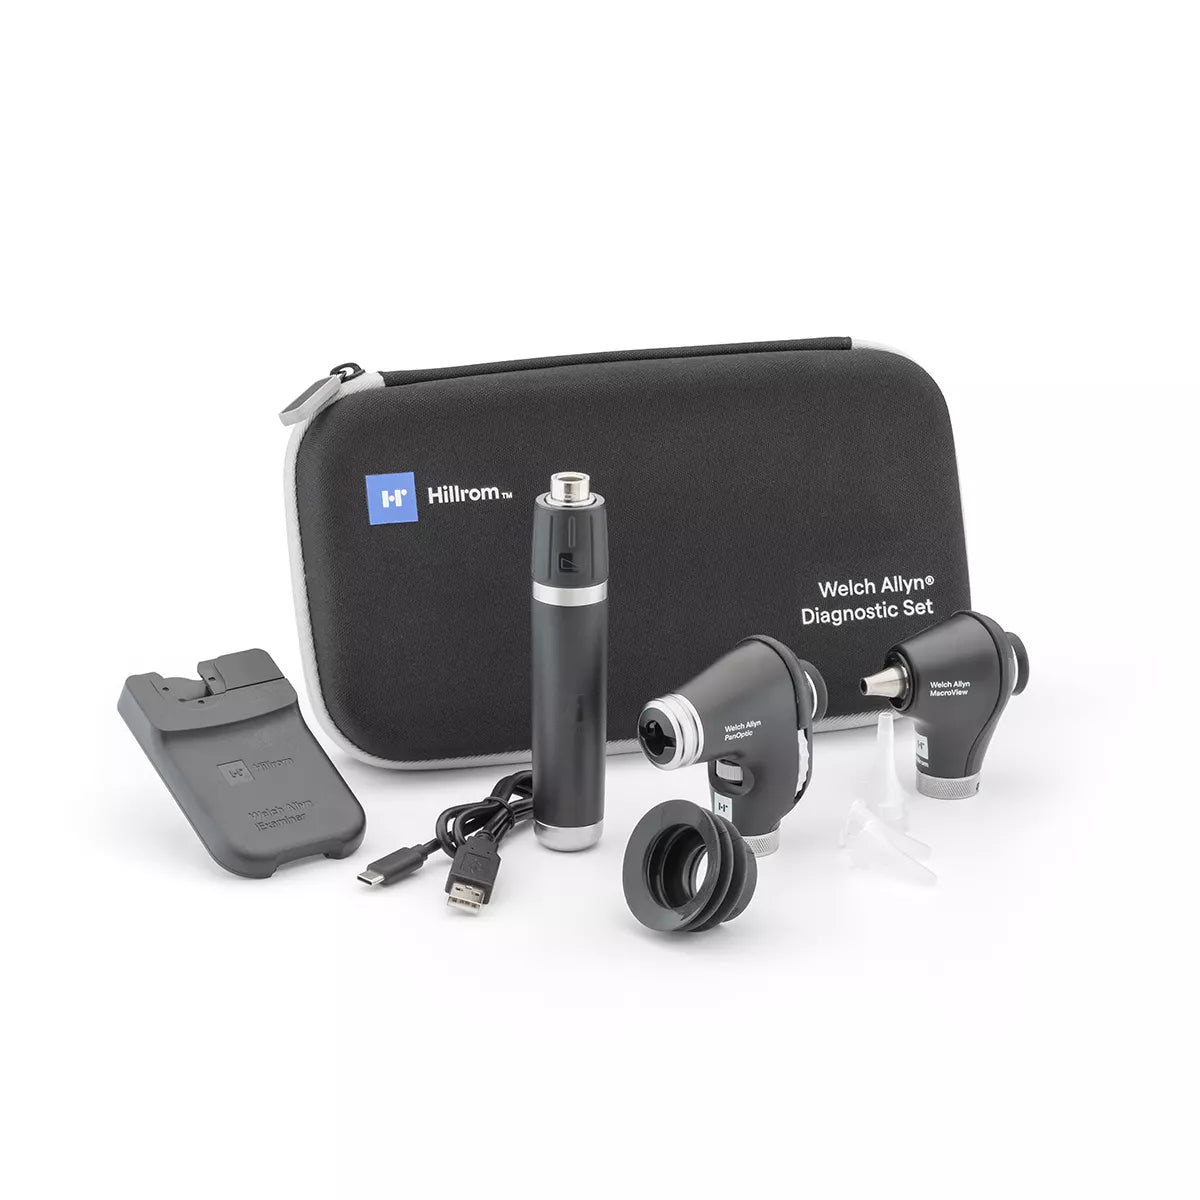 Welch Allyn 3.5V Diagnostic Set with PanOptic Plus LED Ophthalmoscope, MacroView Plus LED Otoscope for iExaminer Welch Allyn